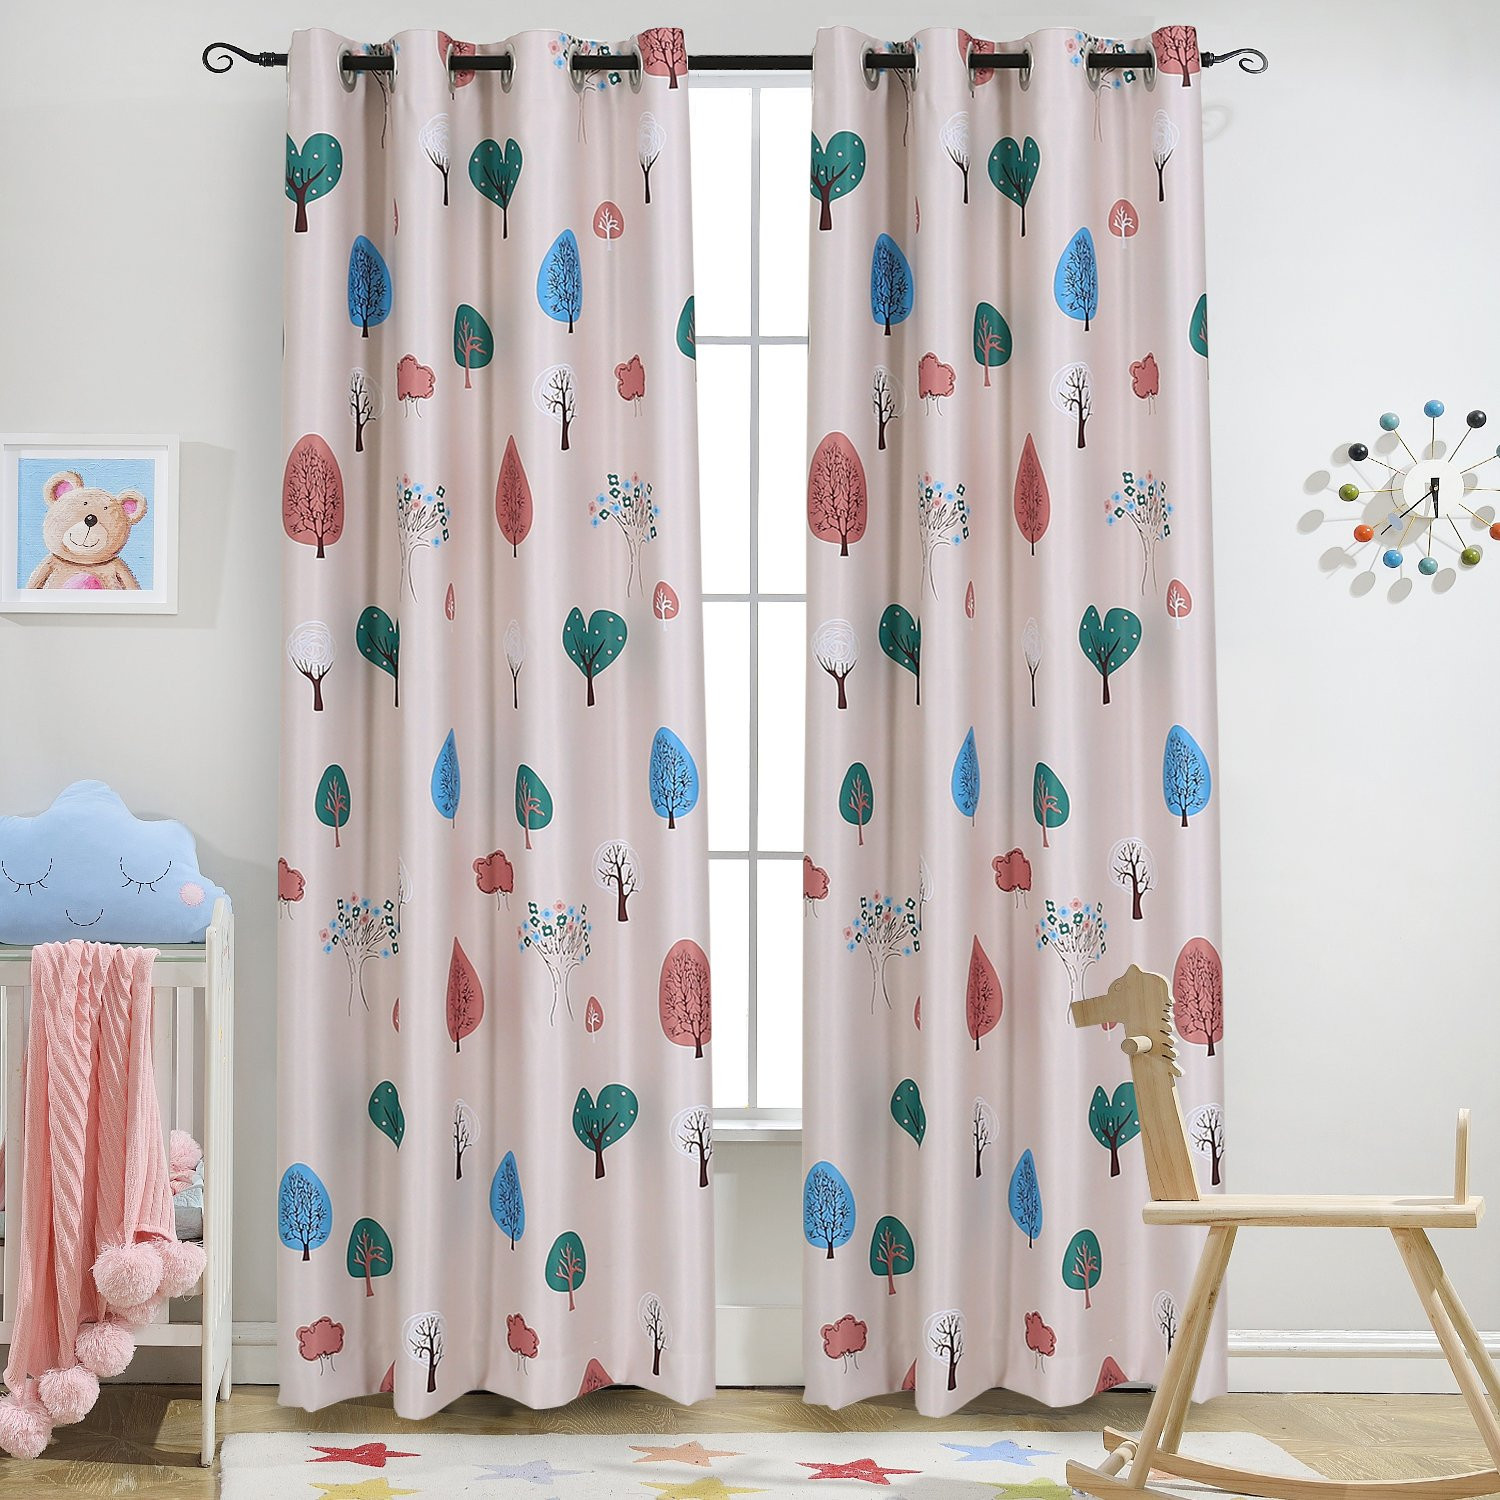 Kids Room Blackout Curtains
 Cartoon Curtains for Kids Bedroom Amazon